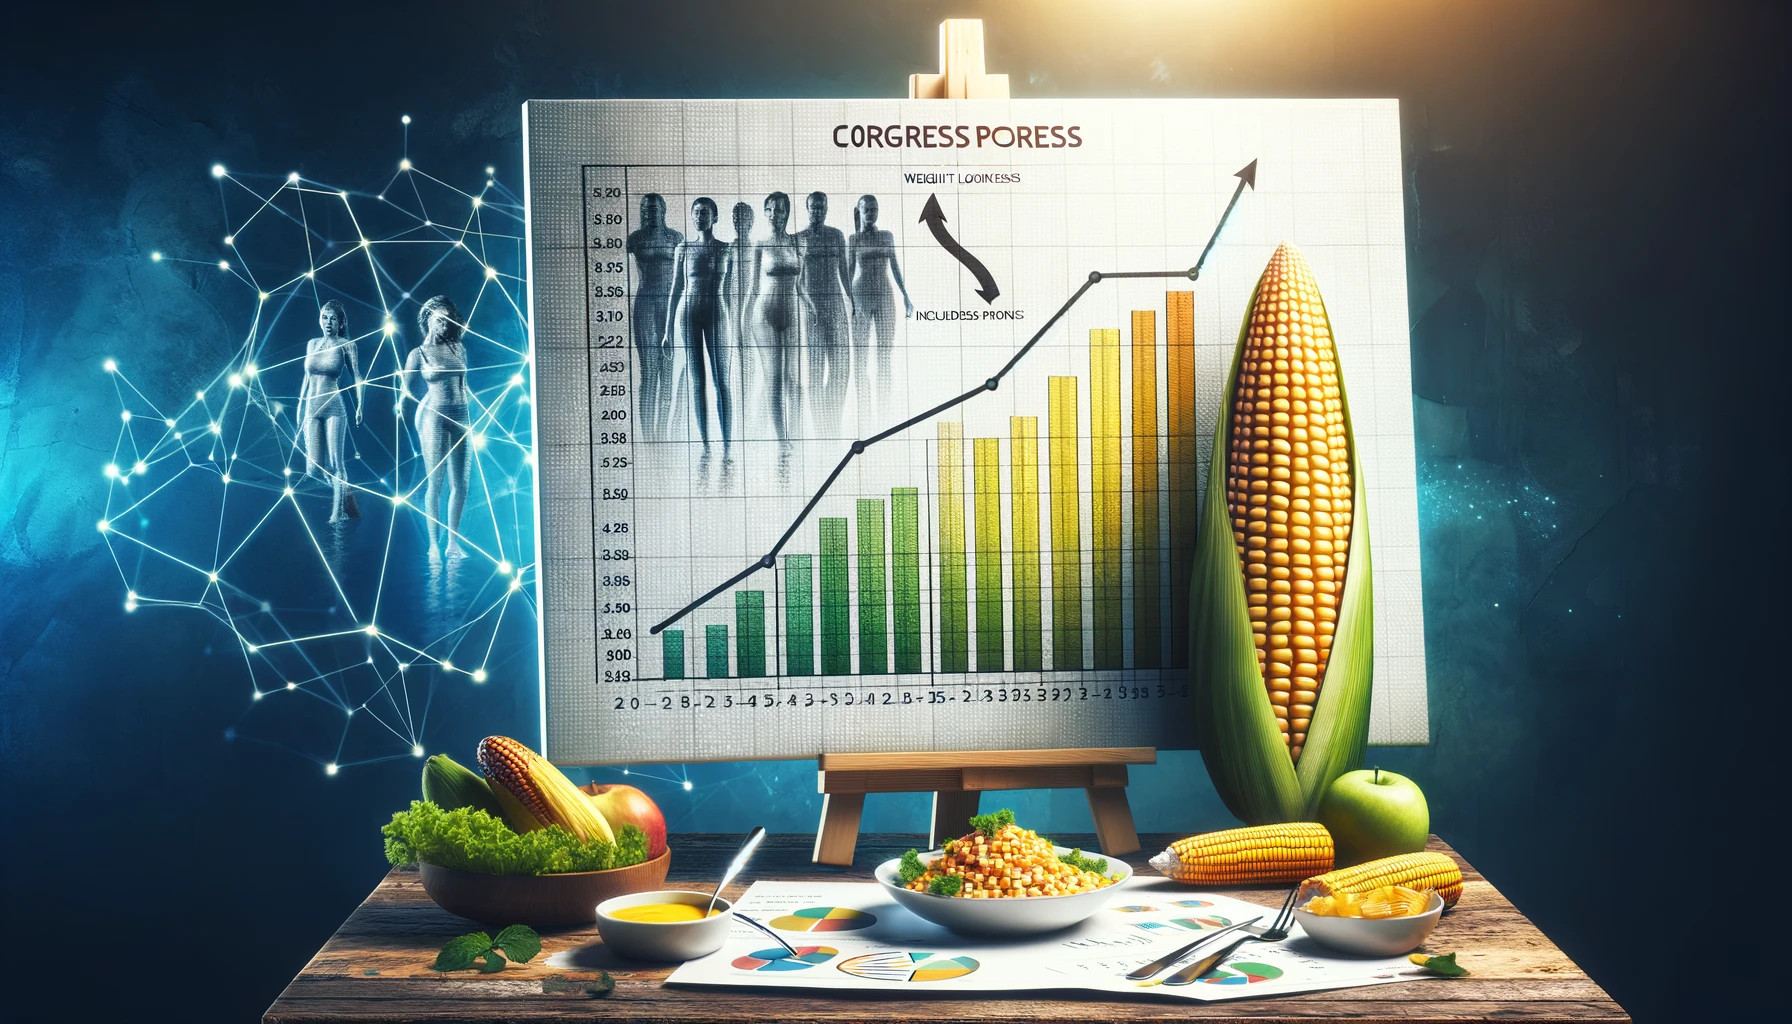 A photo showcasing a weight loss progress chart with corn as a key dietary component, alongside a healthy meal plan.